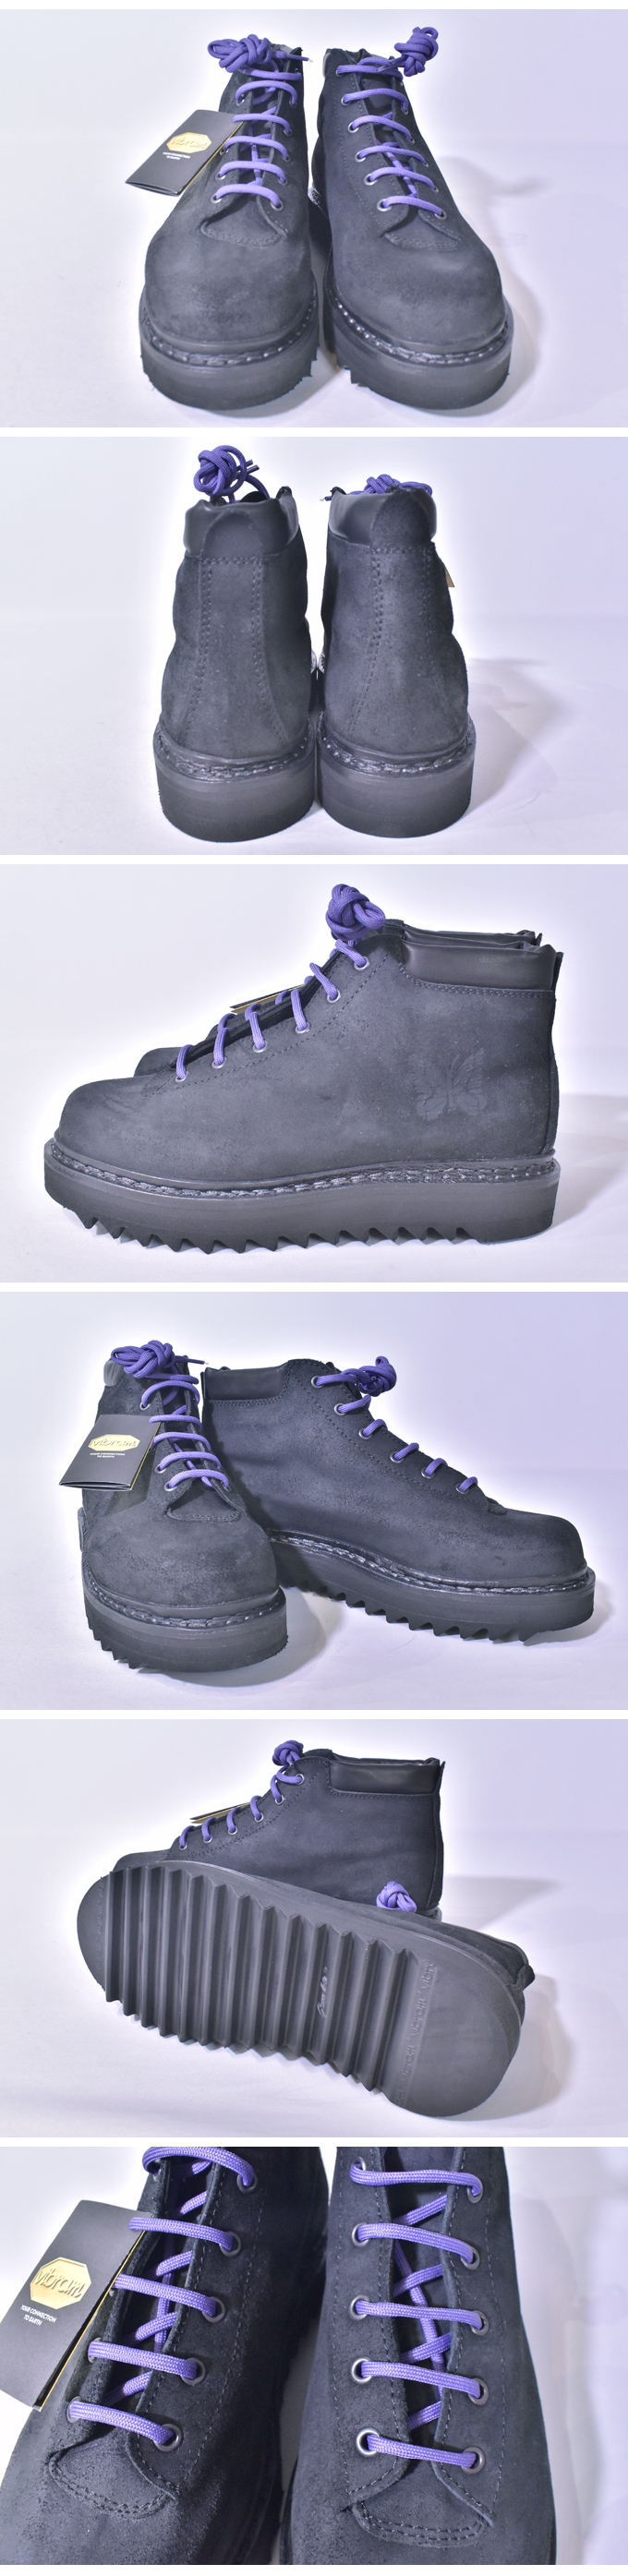 MOUNTAIN BOOT - WAXED SUEDE / Black